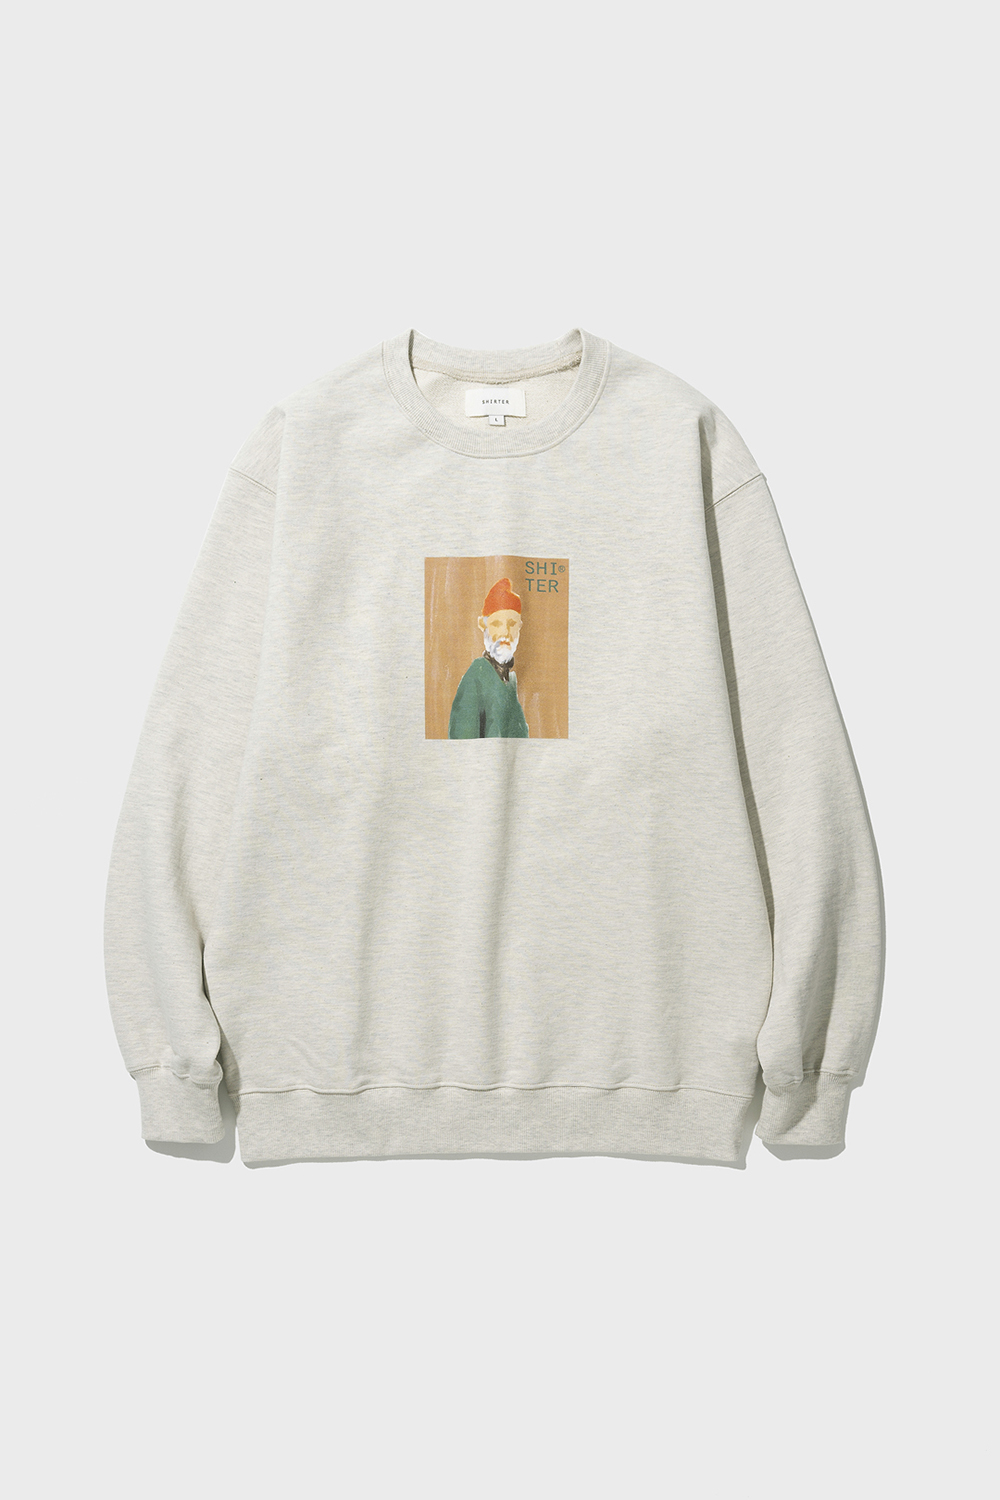 FIRST LIBRARIAN CURATOR SWEATSHIRT (MELANGE IVORY) [SHIRTER for MY LIBRARY]